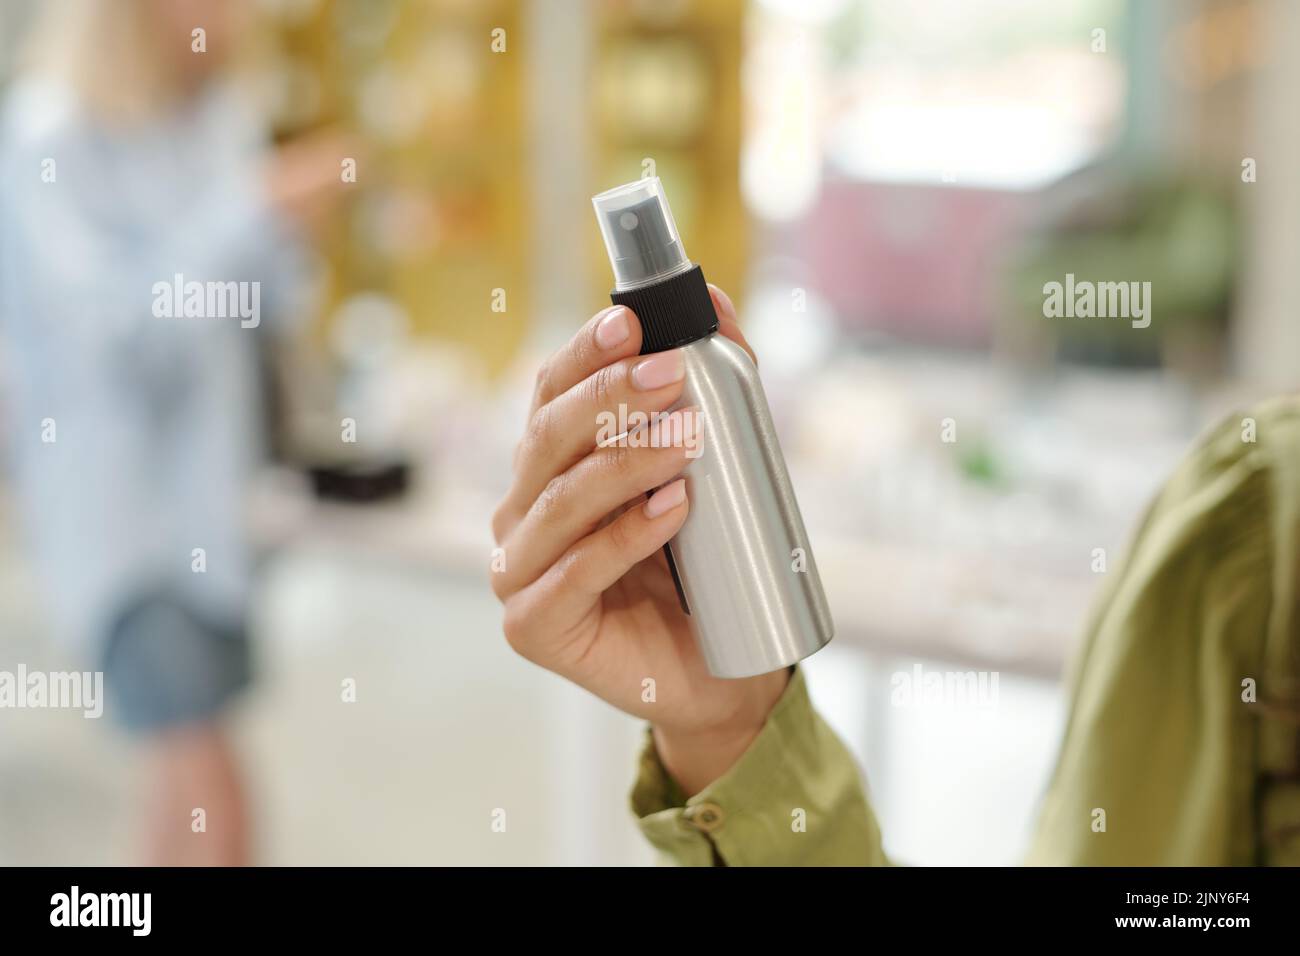 Hand of young woman holding small metallic bottle with sprayer containing liquid haircare product such as spray wax or dry oil Stock Photo